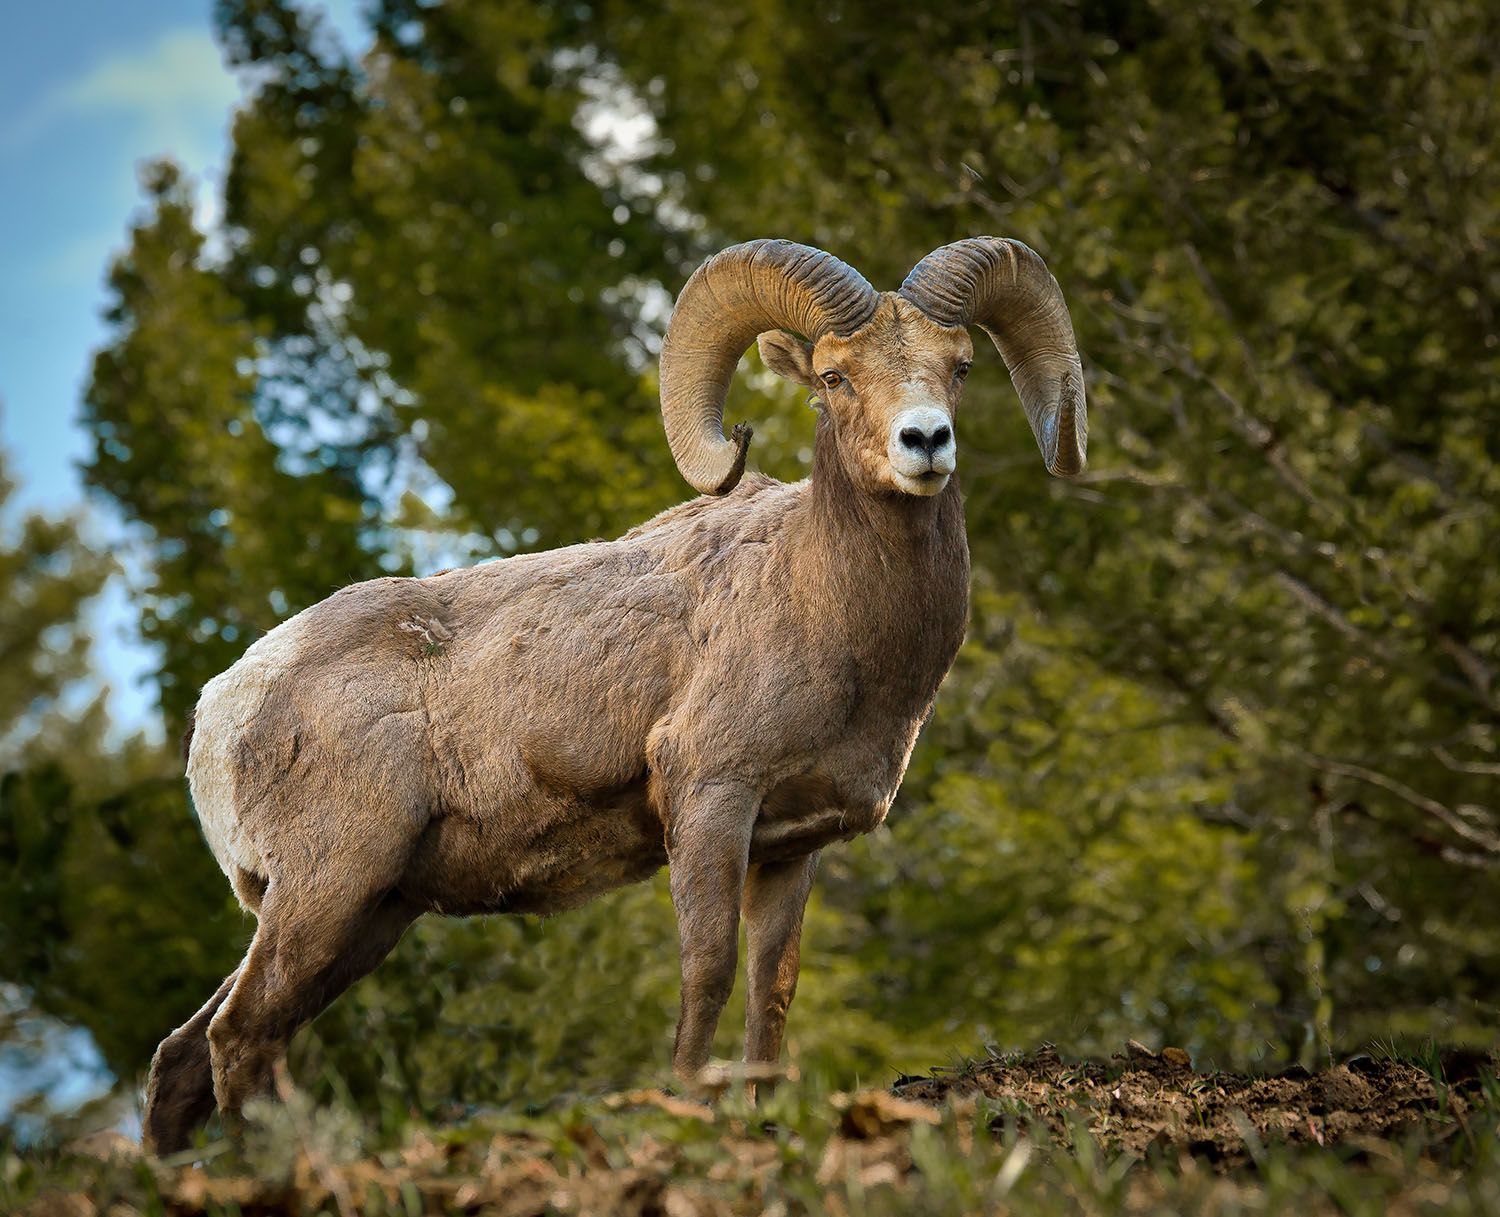 A bighorn sheep standing in the forest